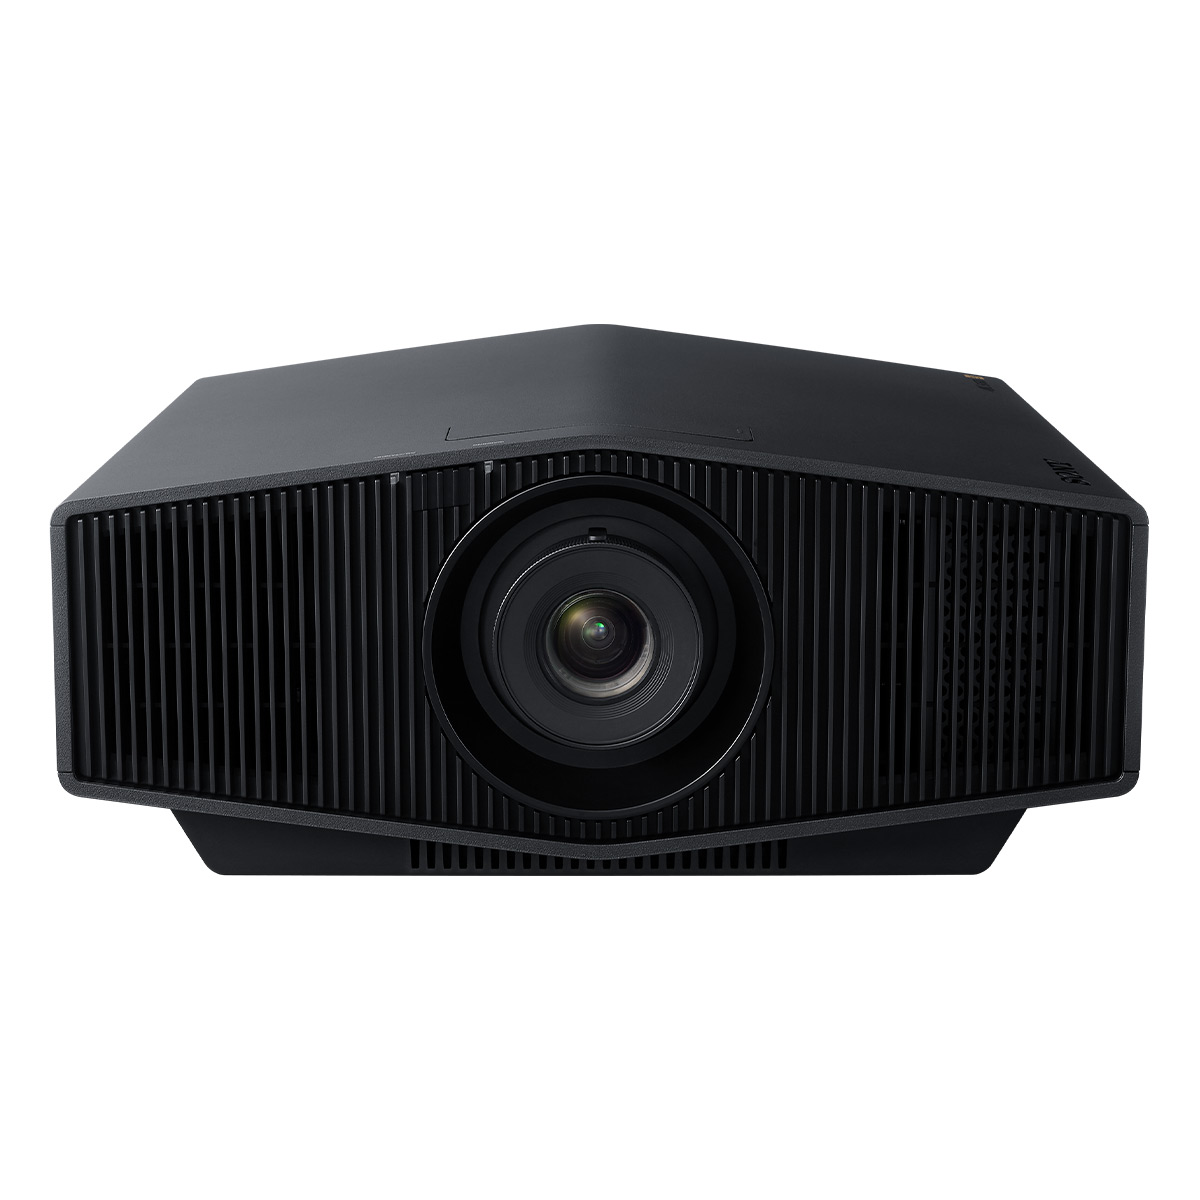 Sony VPL-XW5000ES 4K HDR Laser Home Theater Projector with Wide Dynamic Range Optics, 95% DCI-P3 Wide Color Gamut, & 2,000 Lumen Brightness (Black) - image 2 of 8